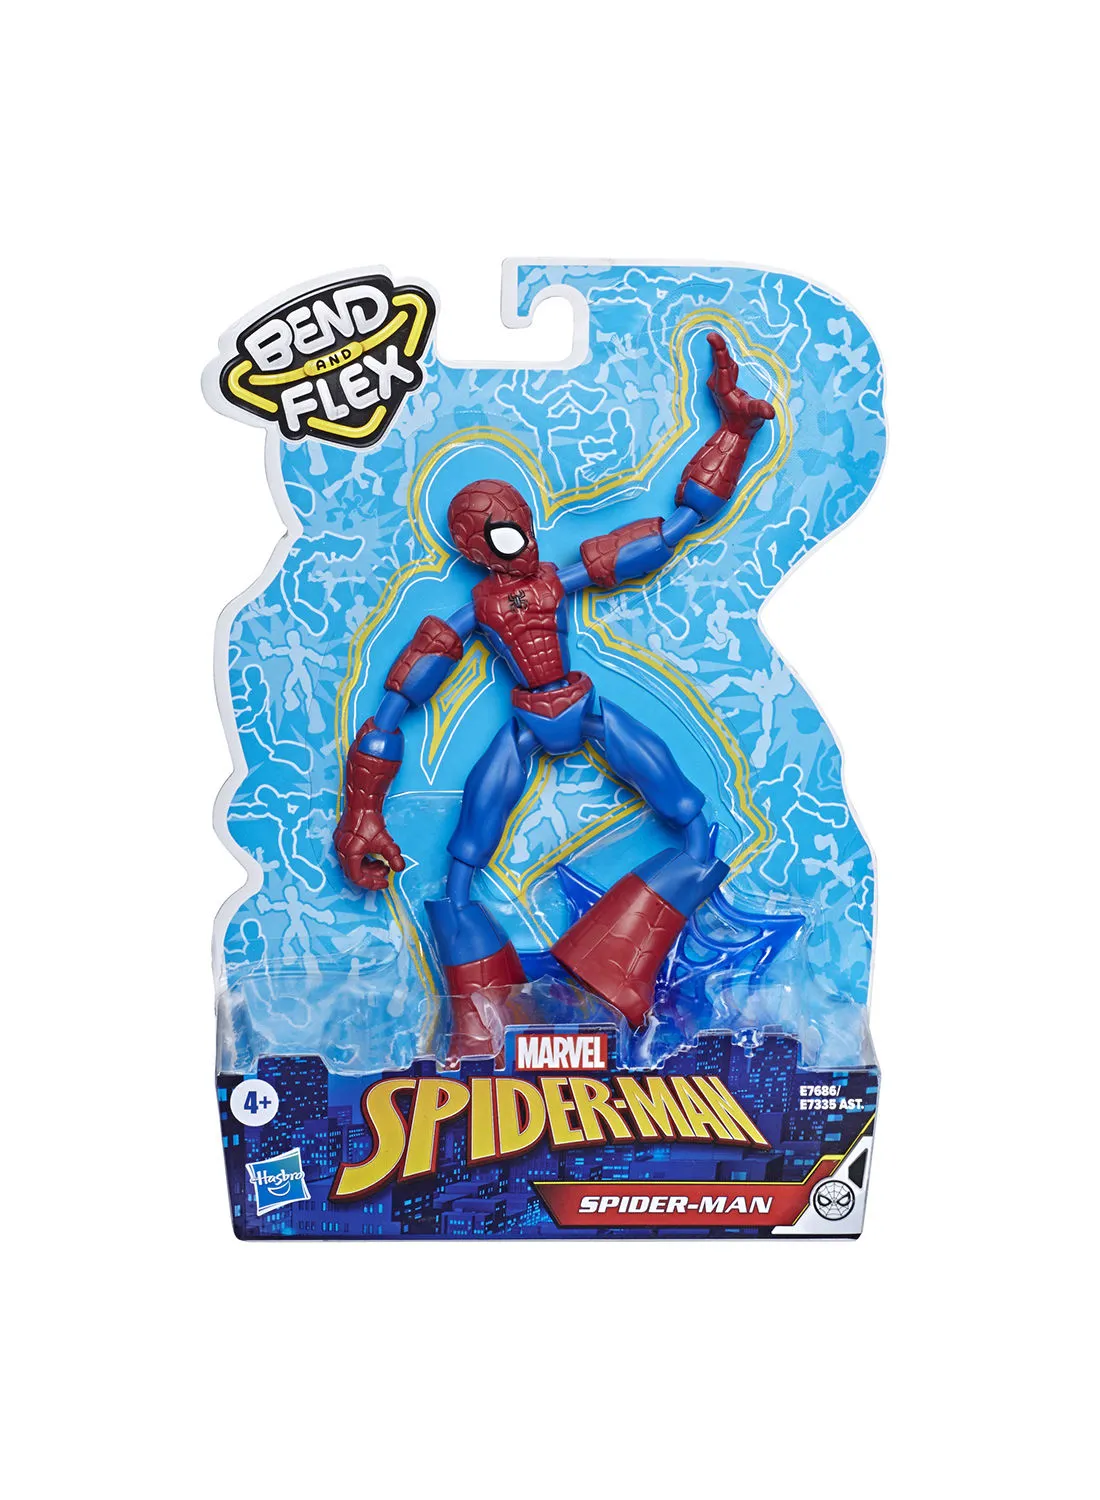 MARVEL Marvel Spider-Man 6-Inch Mystery Web Gear MarvelS Mysterio, 1 Mystery Web Gear Armor Accessory And 1 Character Accessory, Ages 4 And Up 6inch